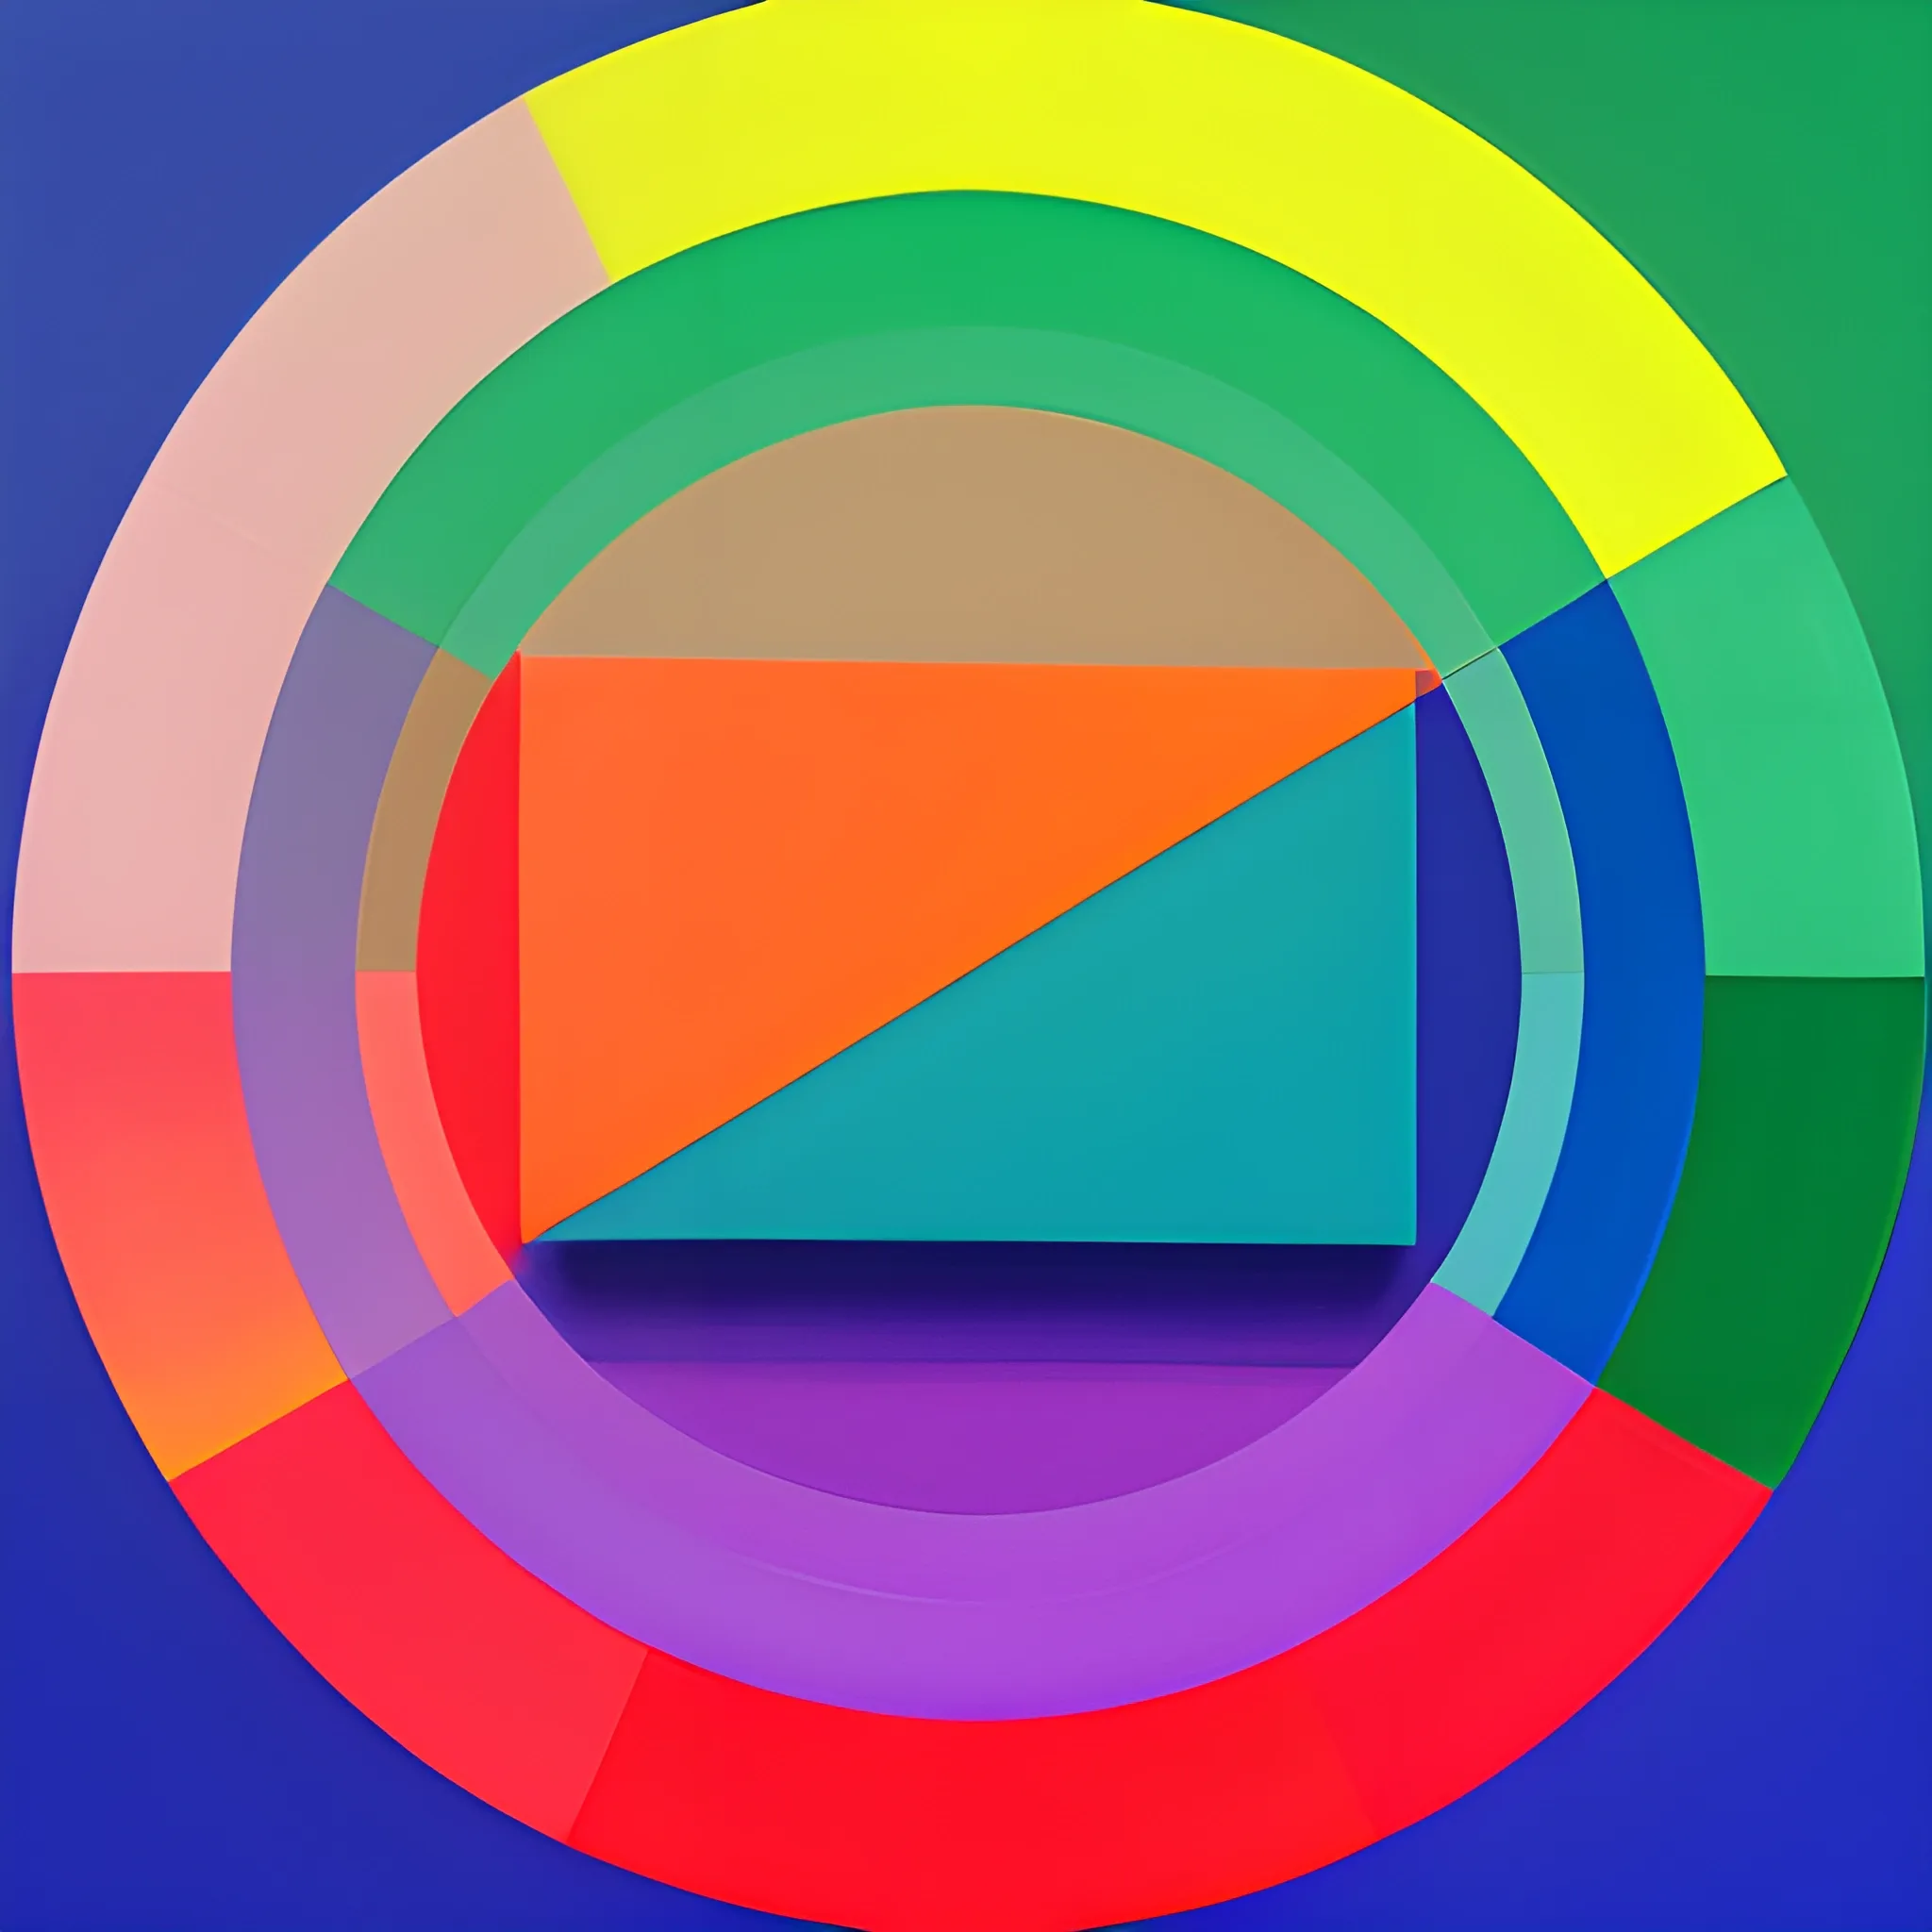 A painting composed of stacked circular color blocks with gradient colors, with some overlapping and interlacing between the color blocks, and the distribution of the color blocks imitating a female body.